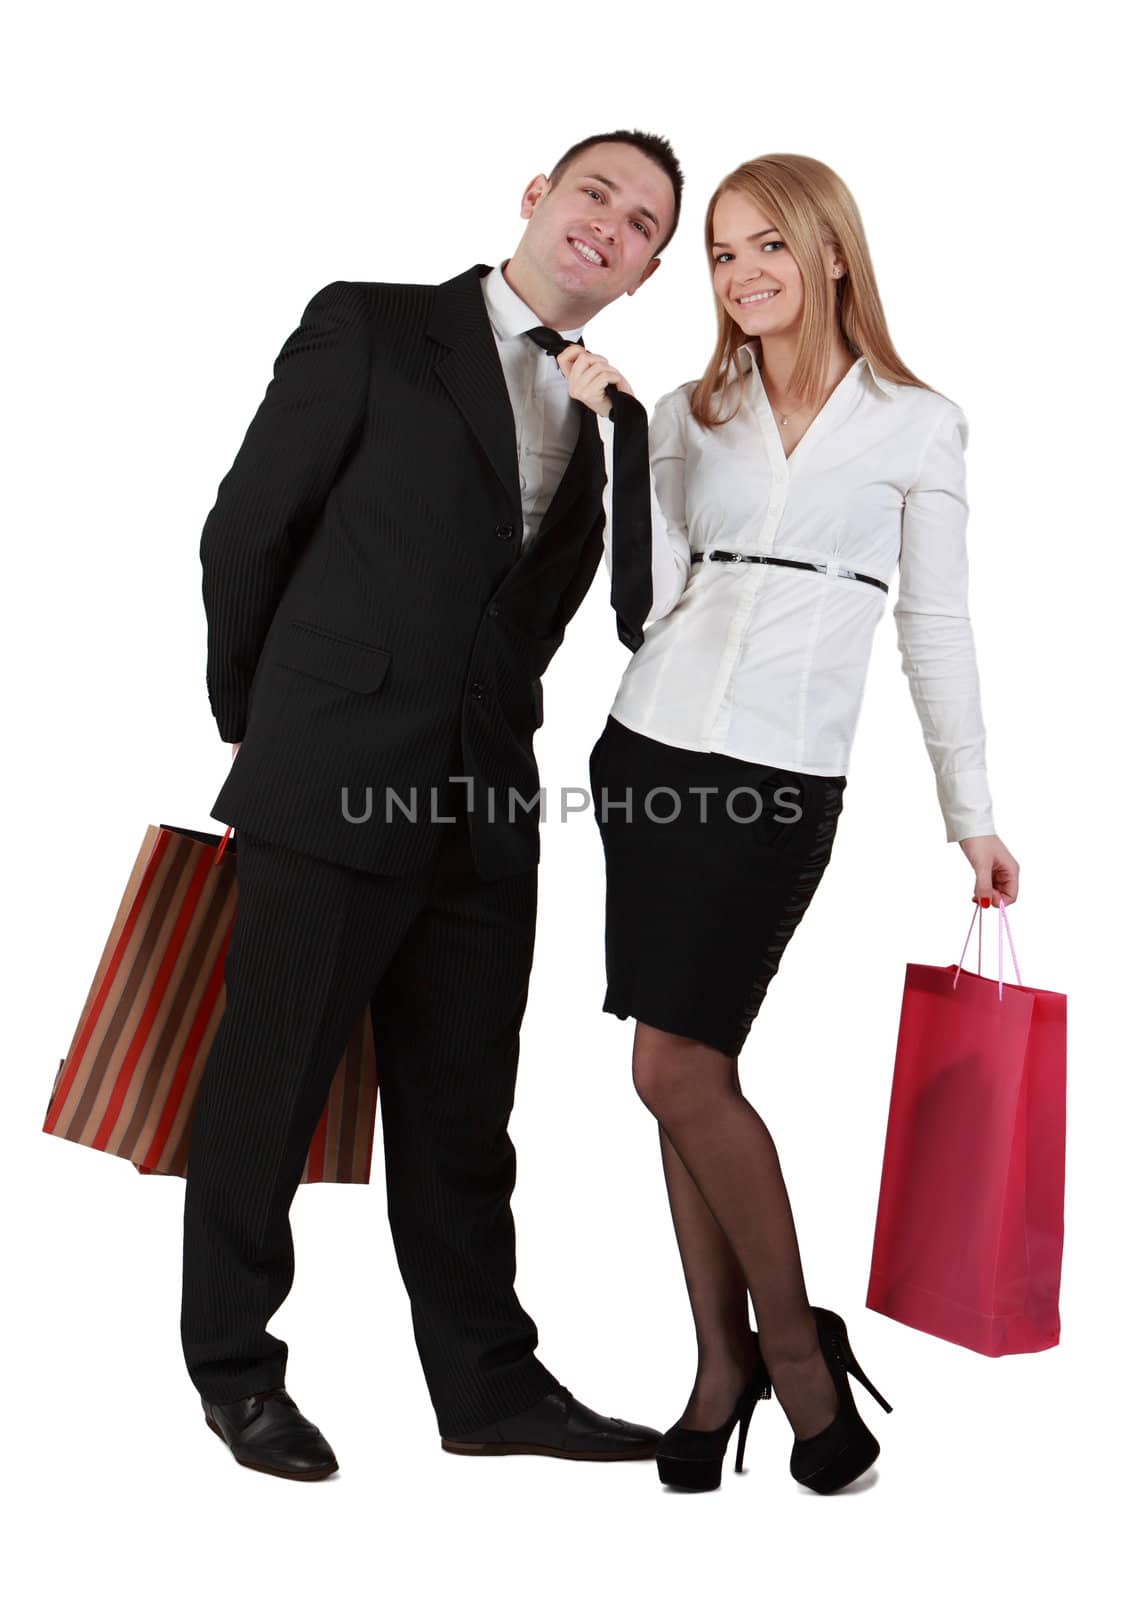 Image of a young couple with shopping bags having fun while the woman pulls her boyfriend tie.